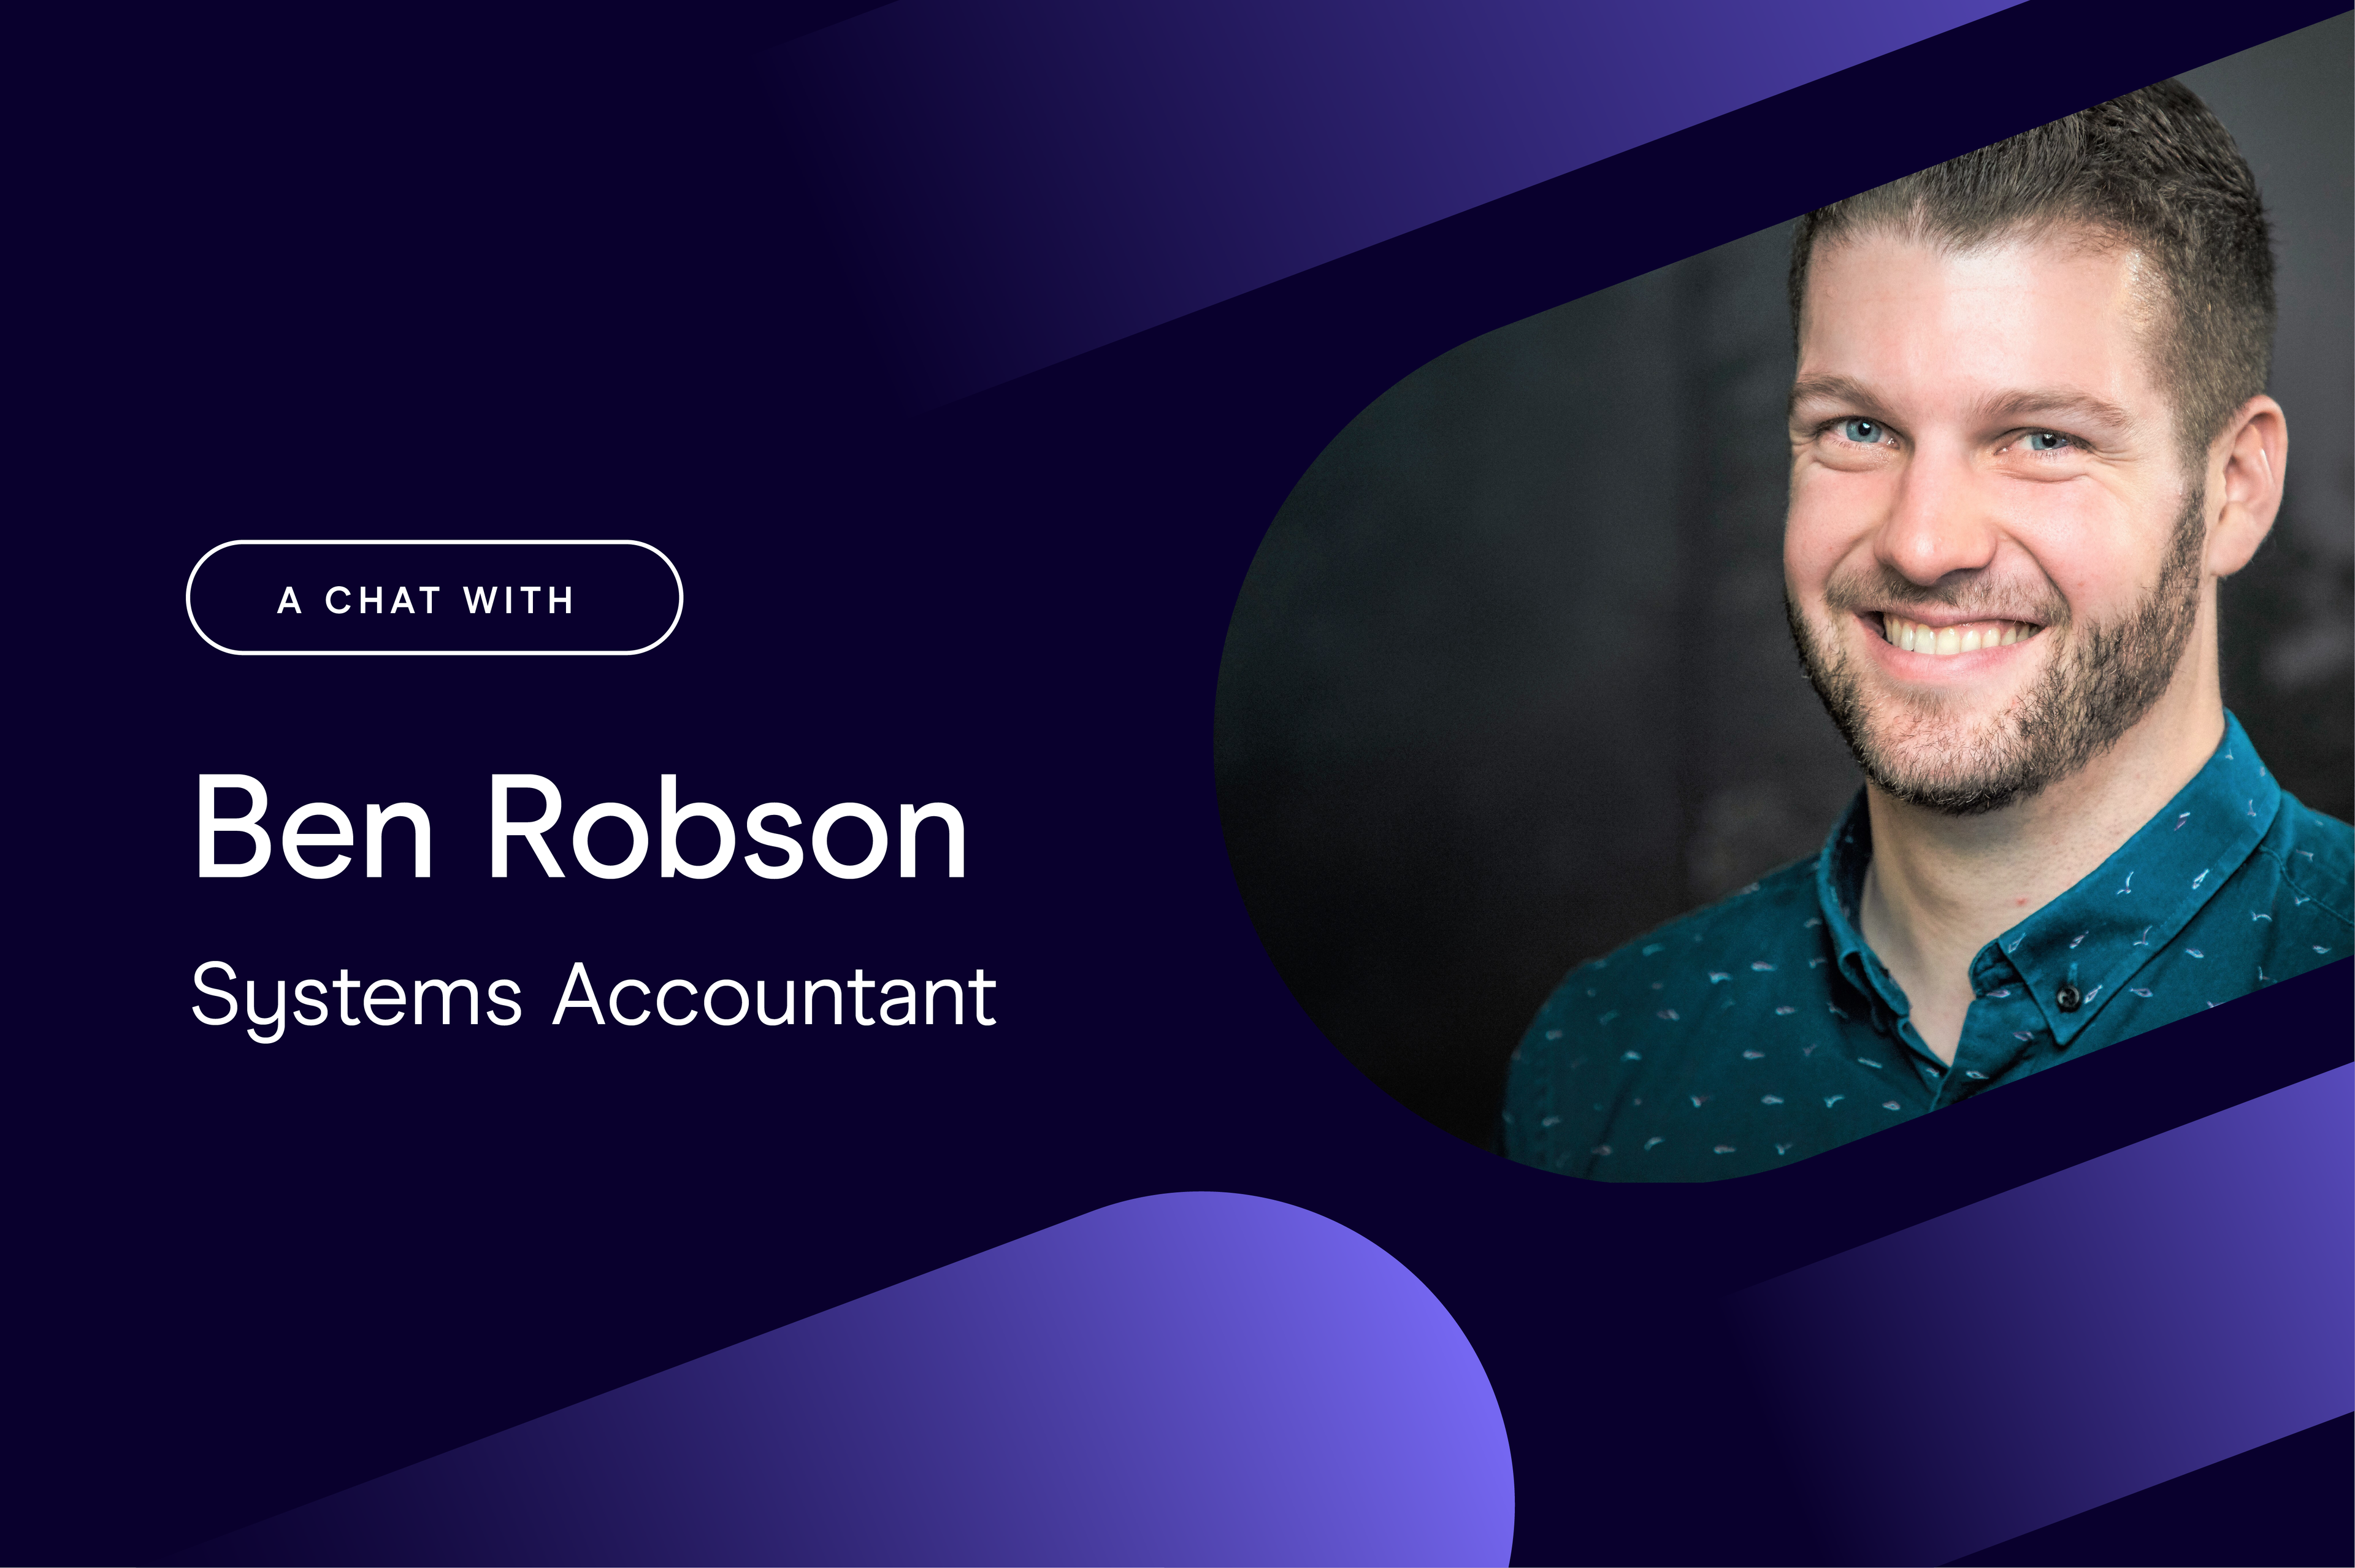 Ben Robson, System Accountant